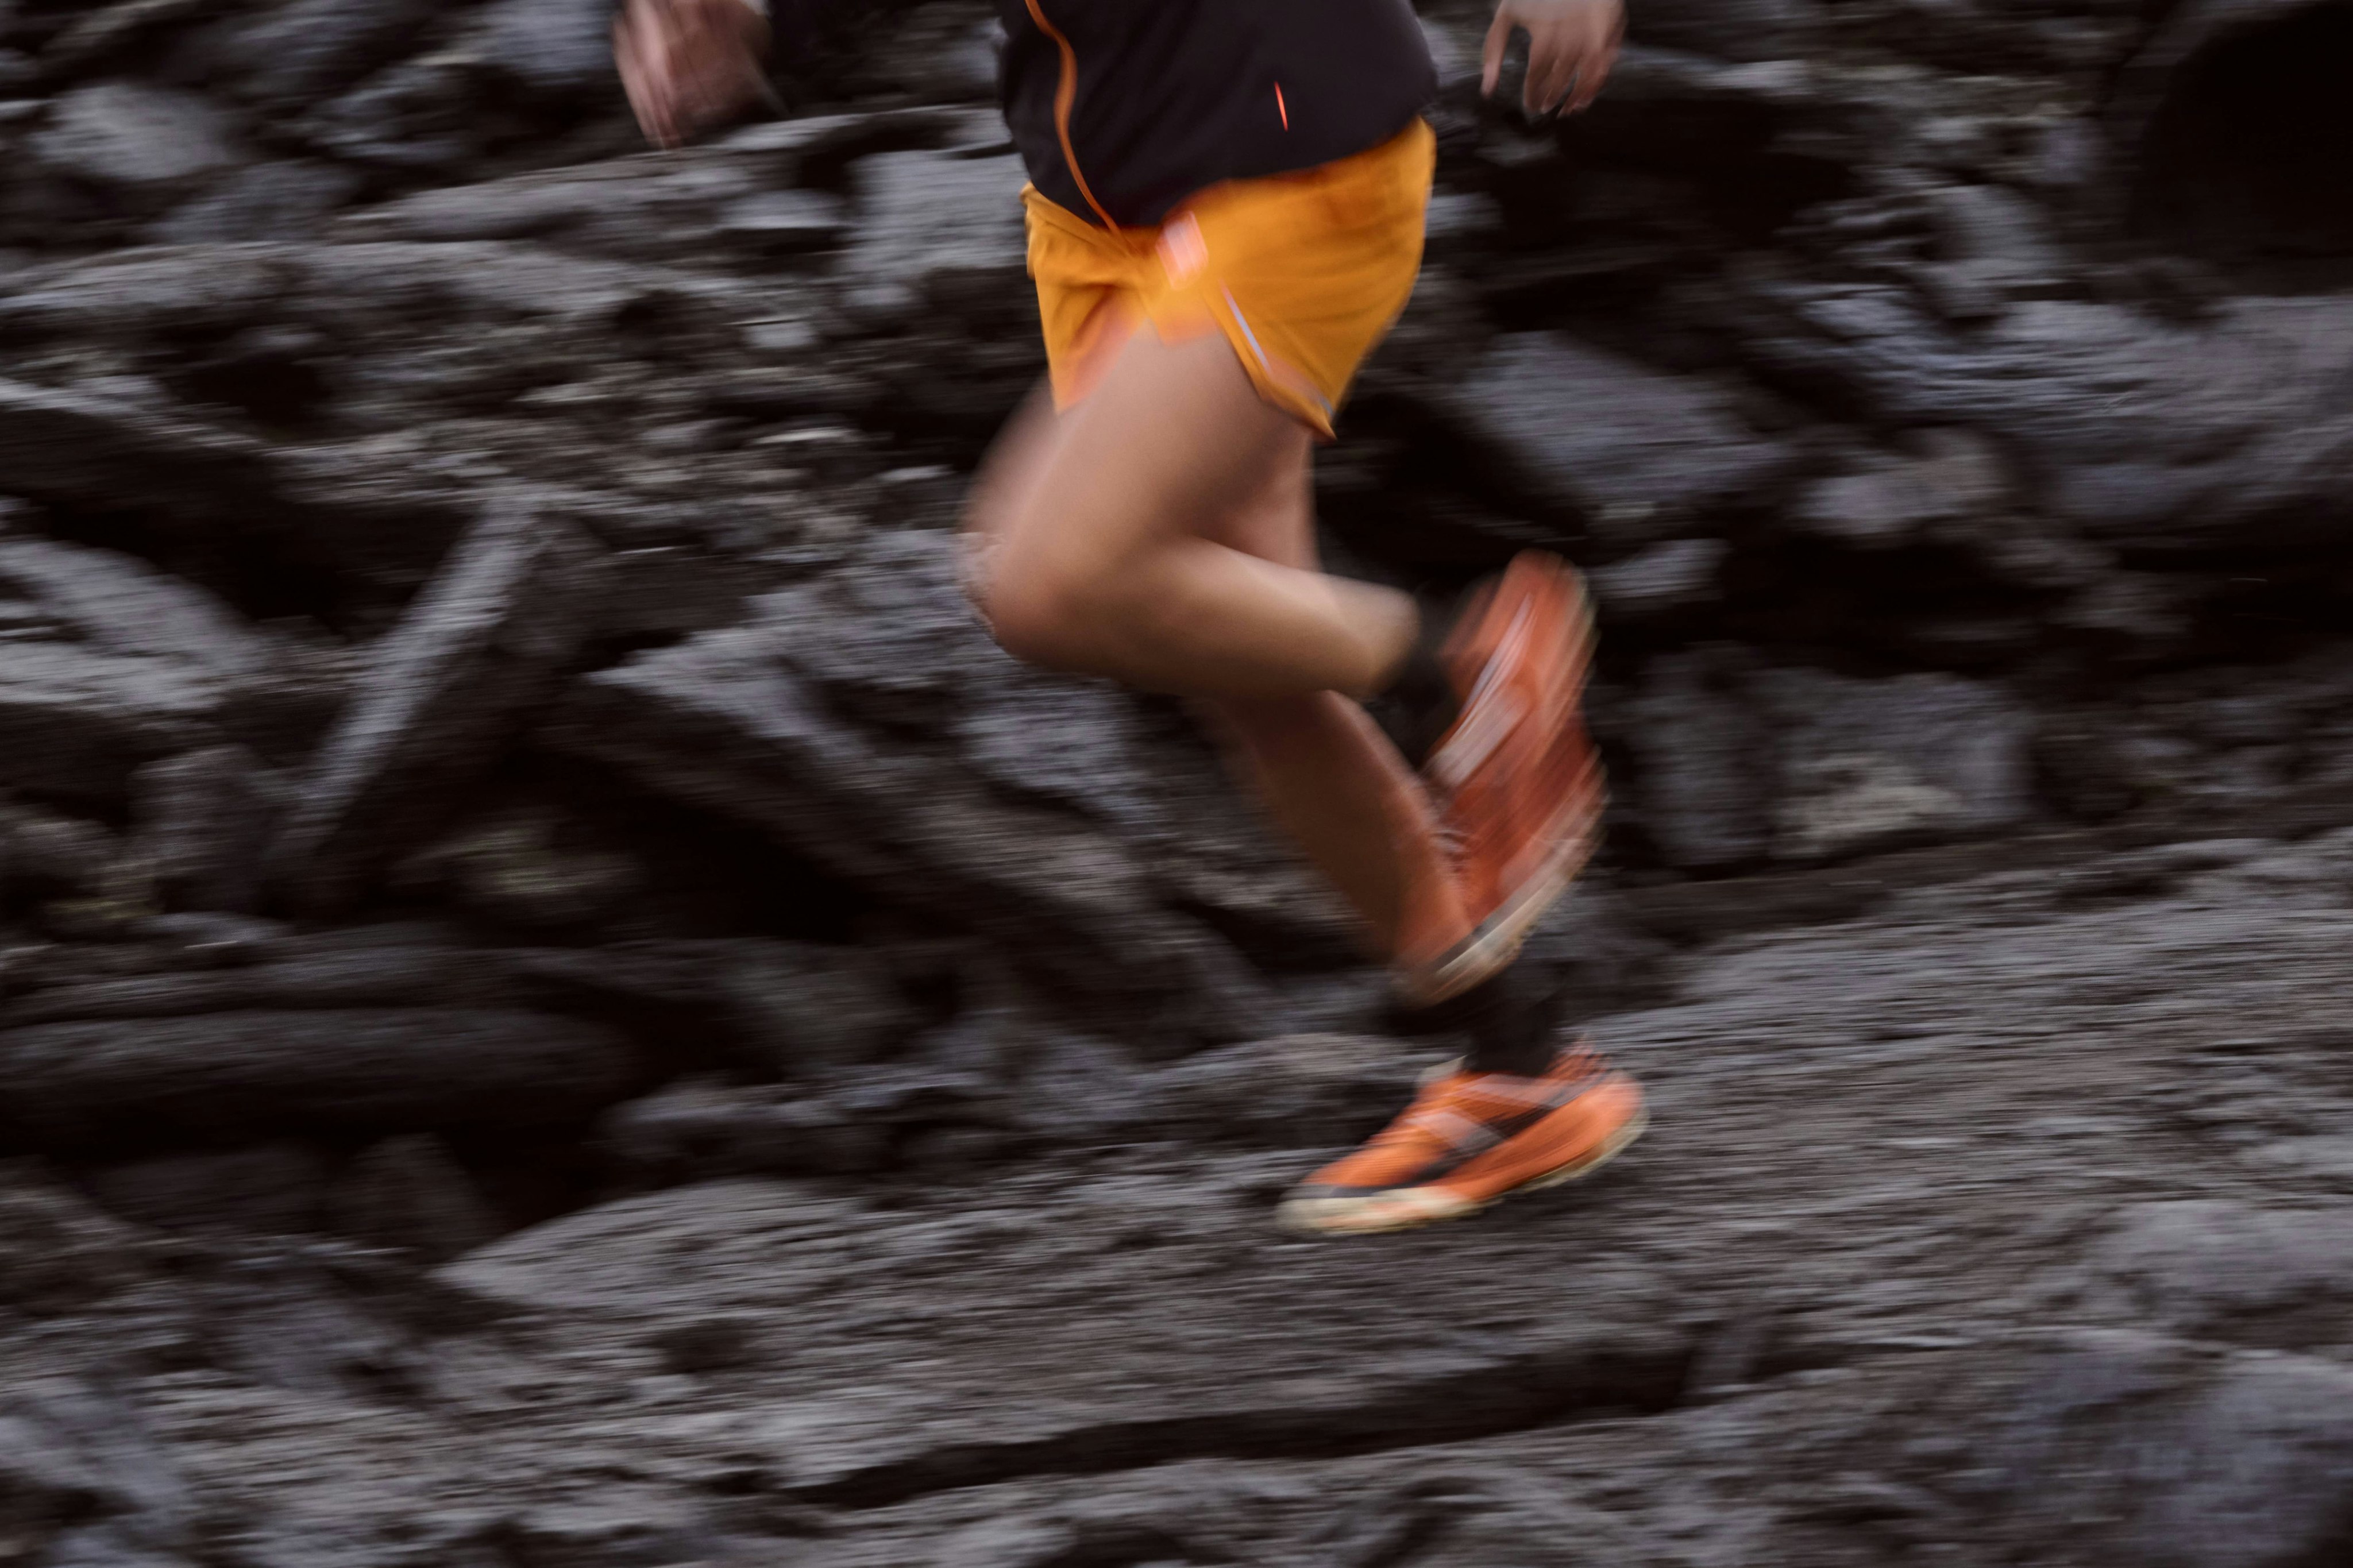 Trailrunning in Iceland